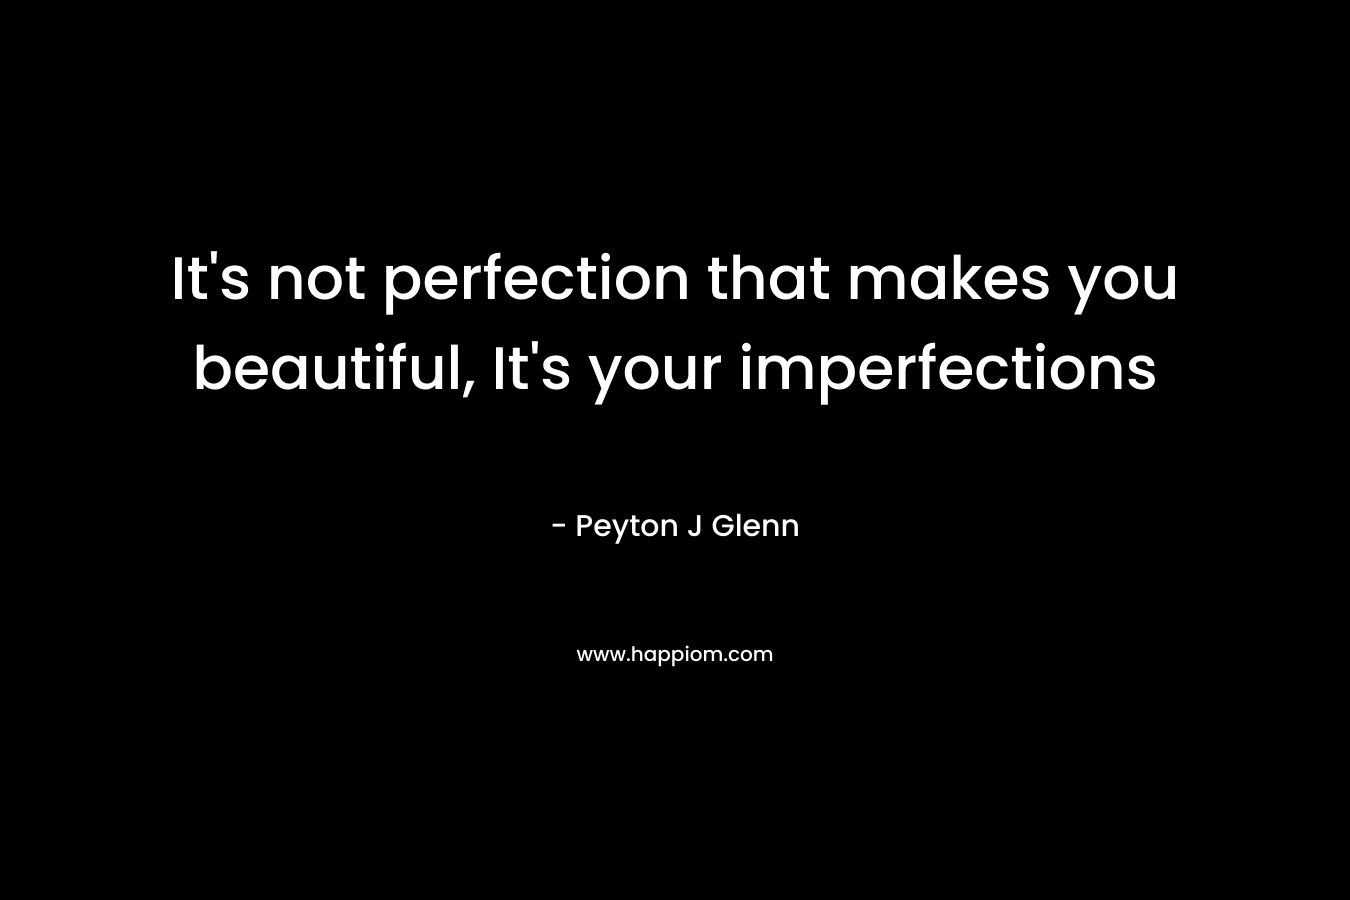 It's not perfection that makes you beautiful, It's your imperfections